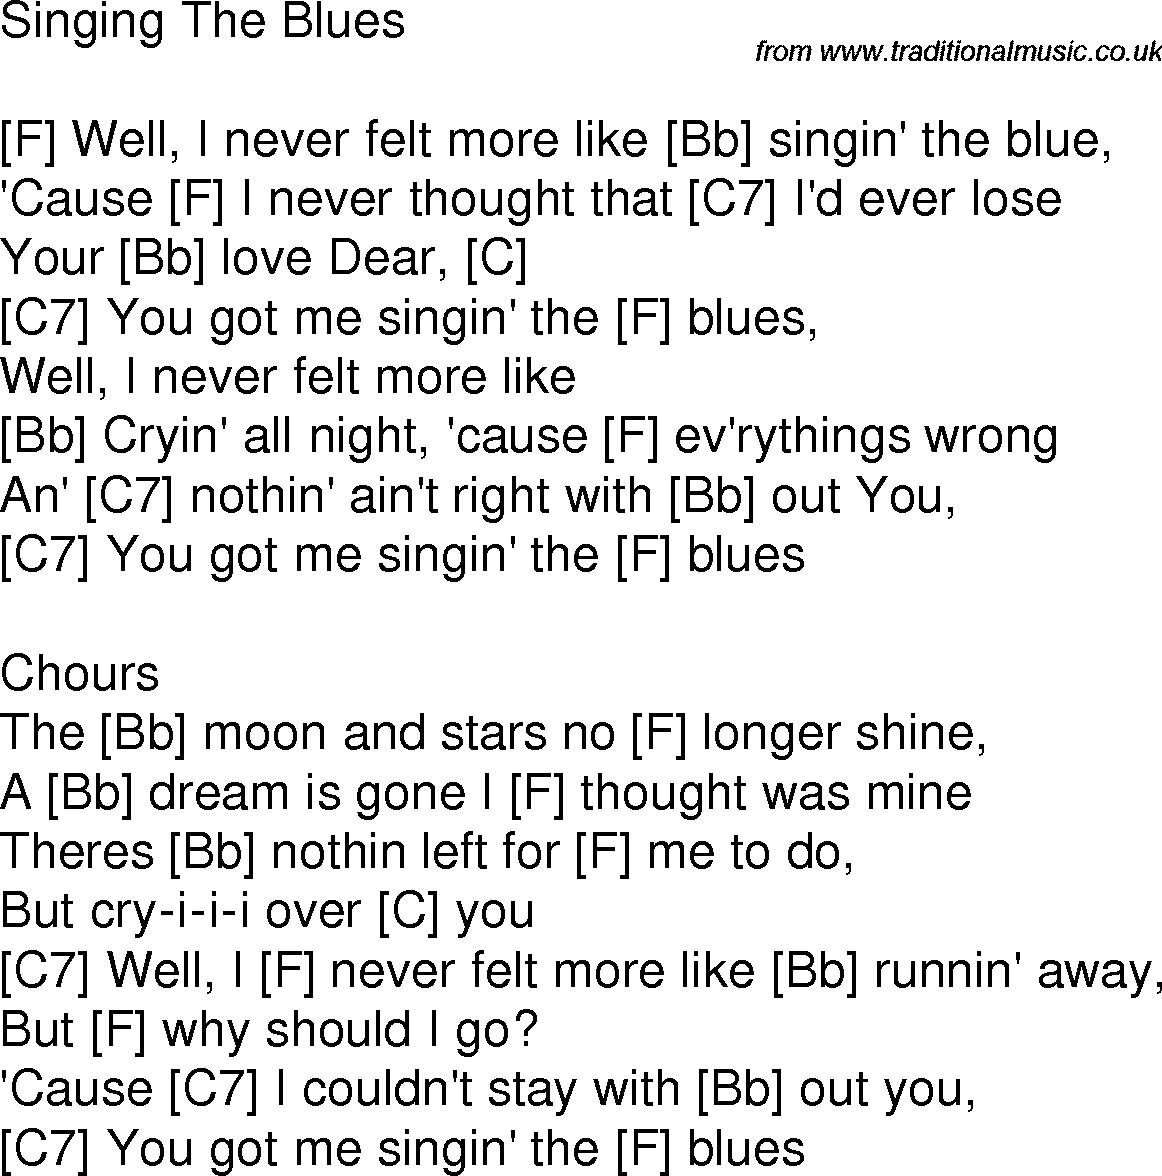 Old time song lyrics with chords for Singin' The Blues F